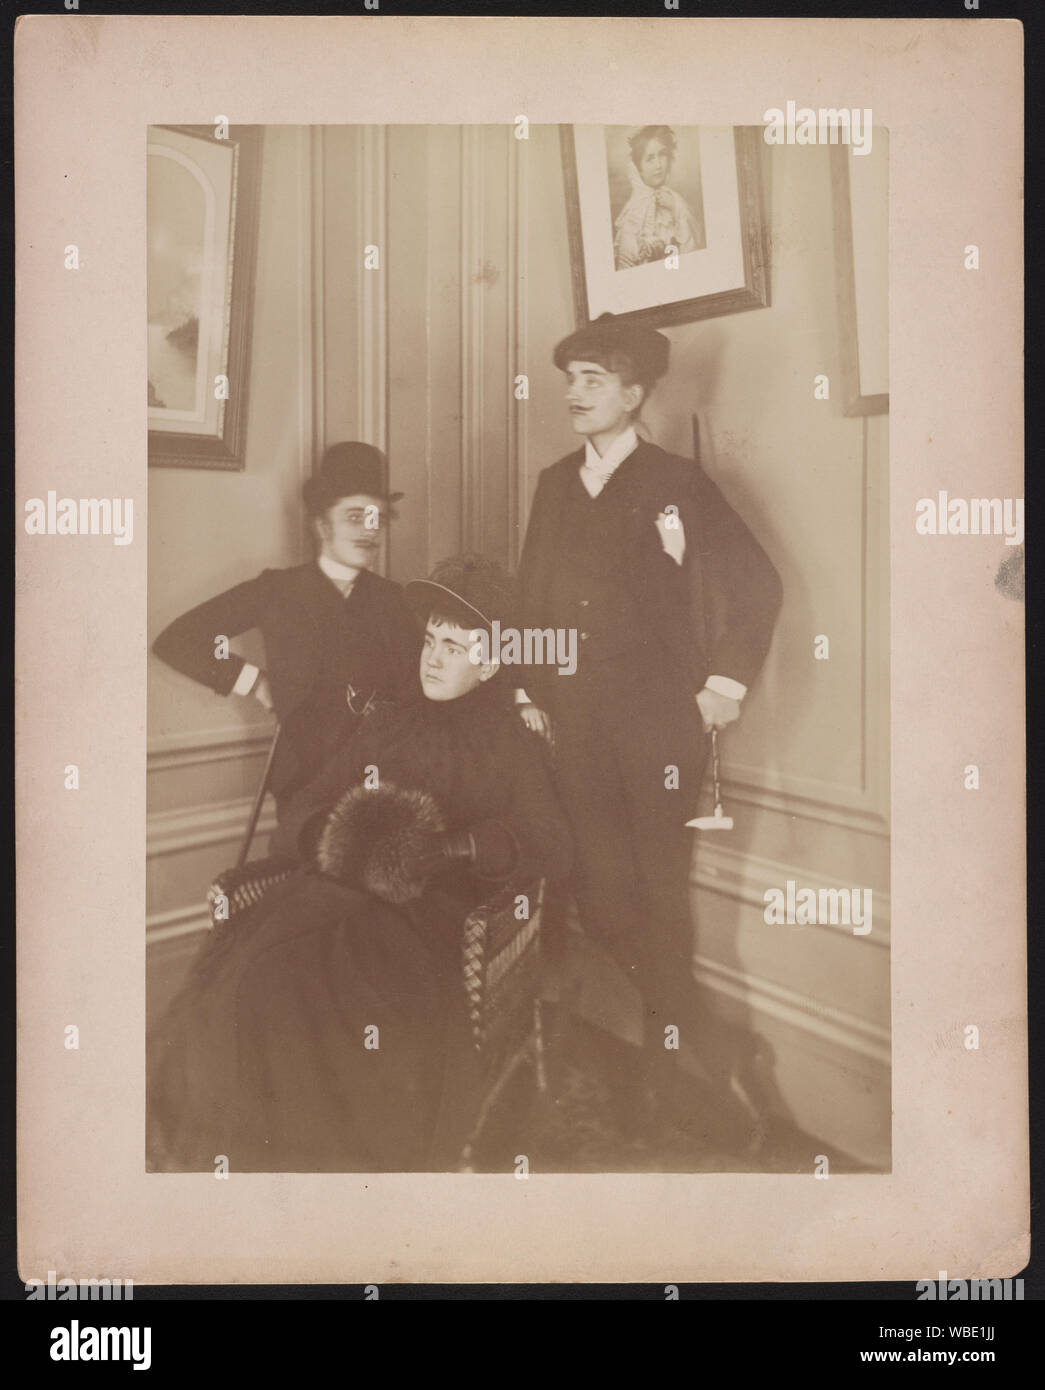 Frances Benjamin Johnston, full lgth., standing, in costume, wearing mustache, posed with 2 other people Abstract/medium: 1 photographic print mounted on layered paper : albumen ; photo 21 x 15 cm, on mount 25.3 x 20.3 cm. Stock Photo